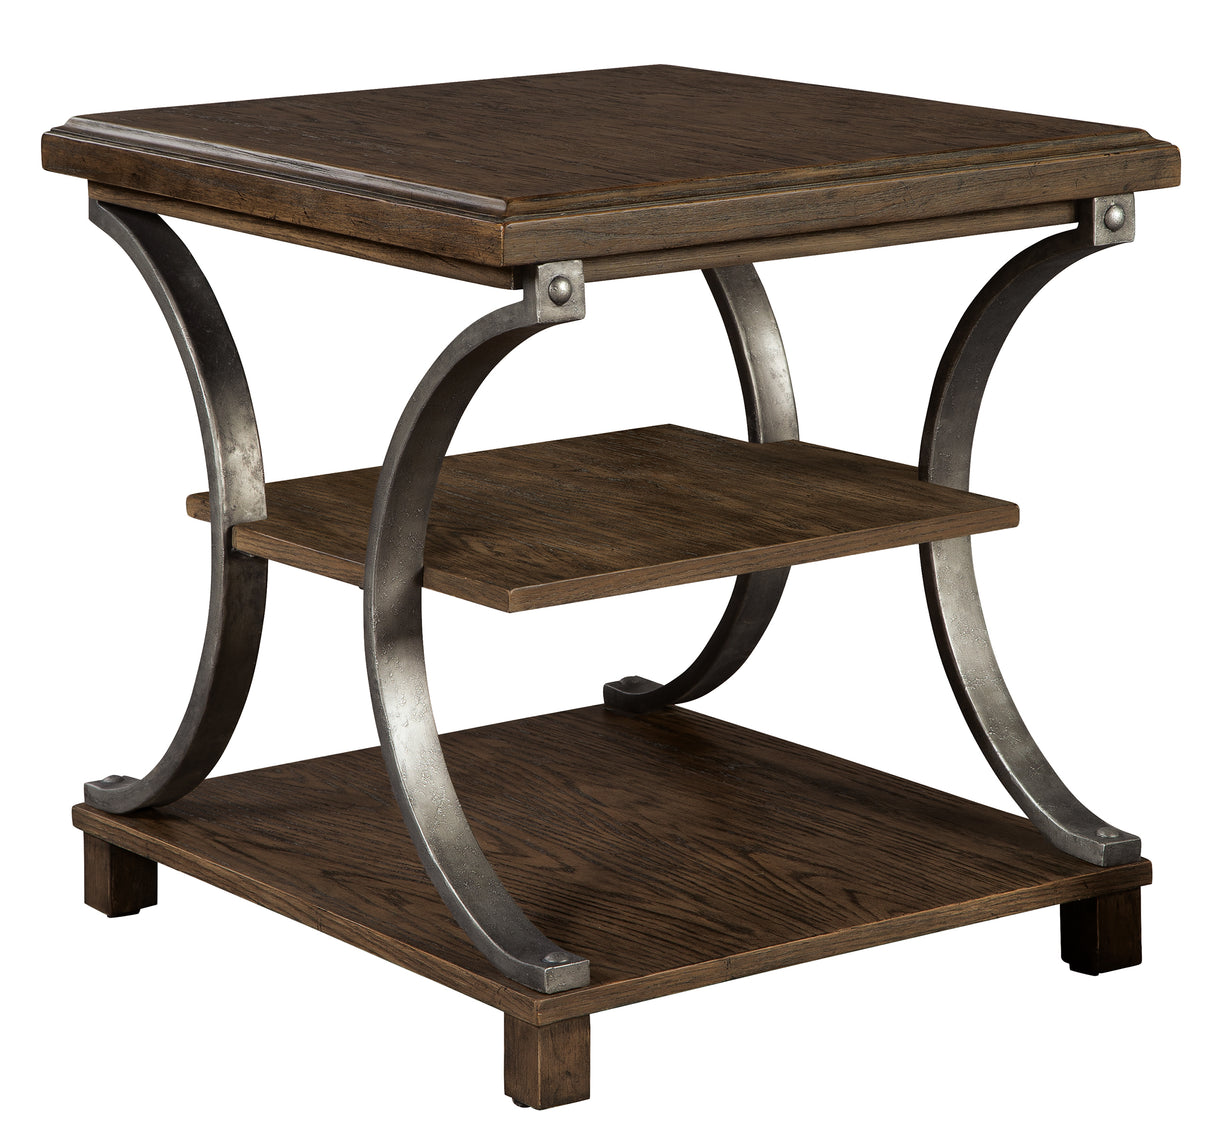 Hekman 24804 Wexford 24in. x 26in. x 26.25in. End Table